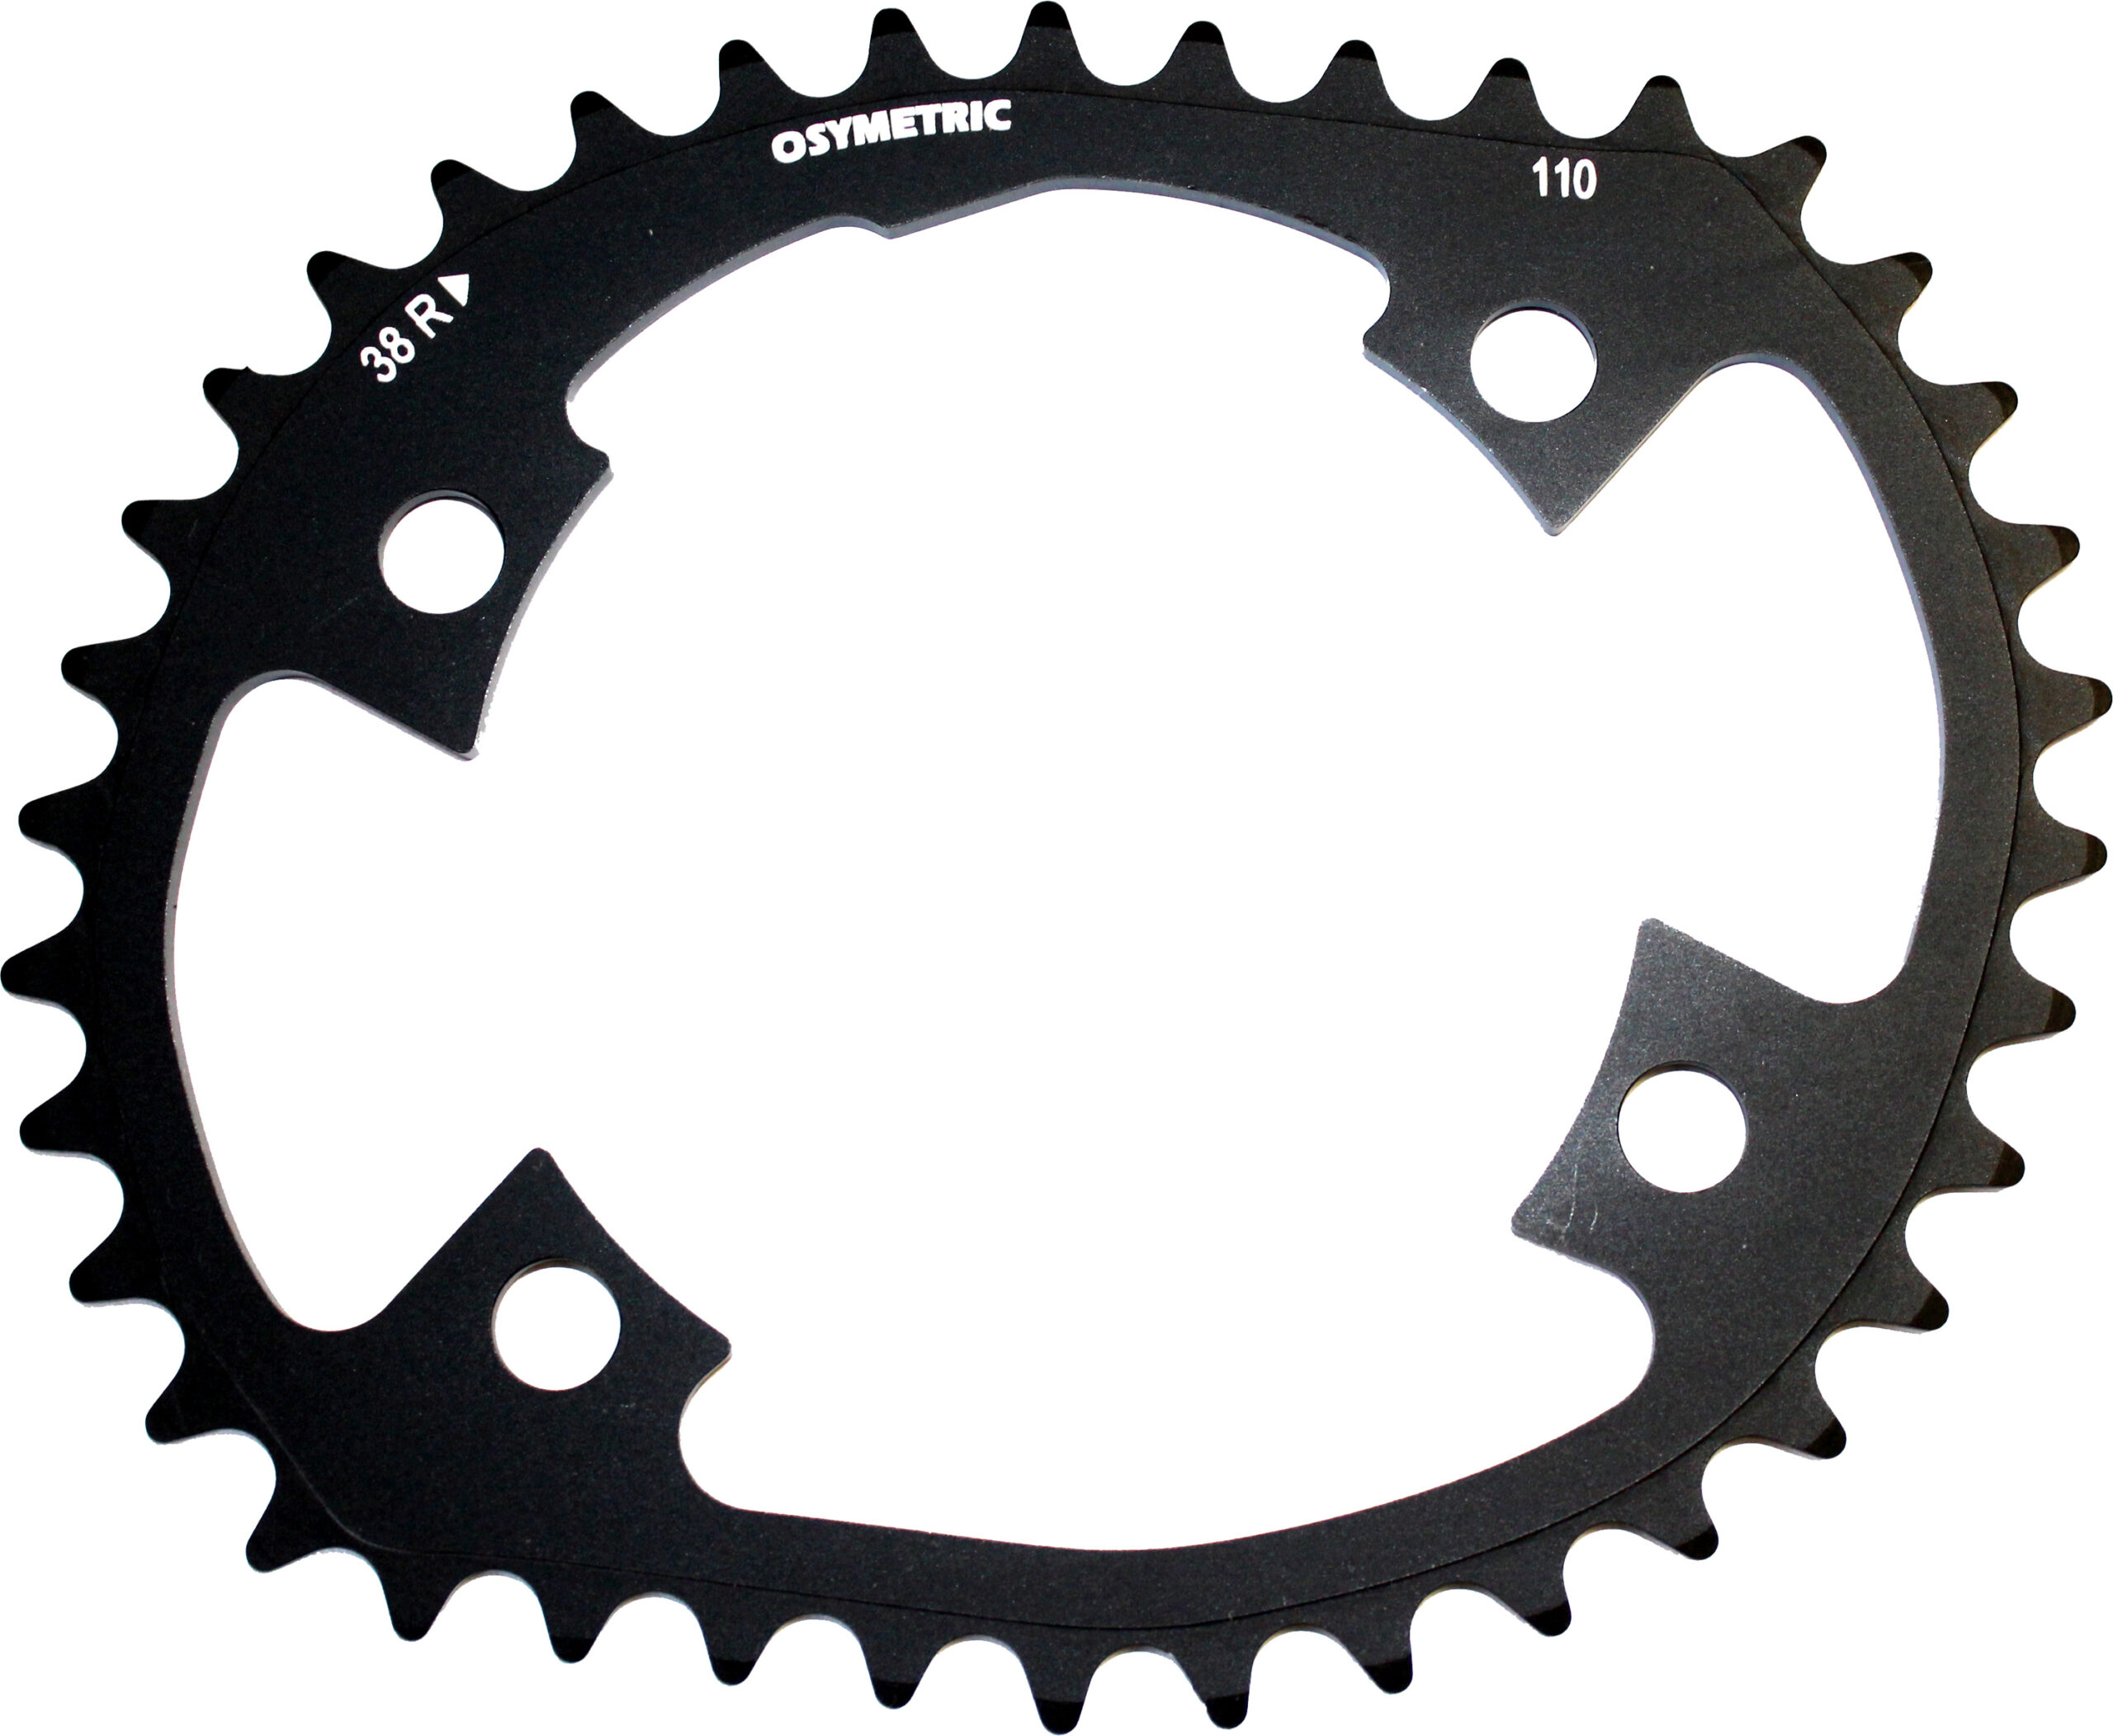 OS110C 52T Osymetric 5-Arm/110mm Campag Chainring